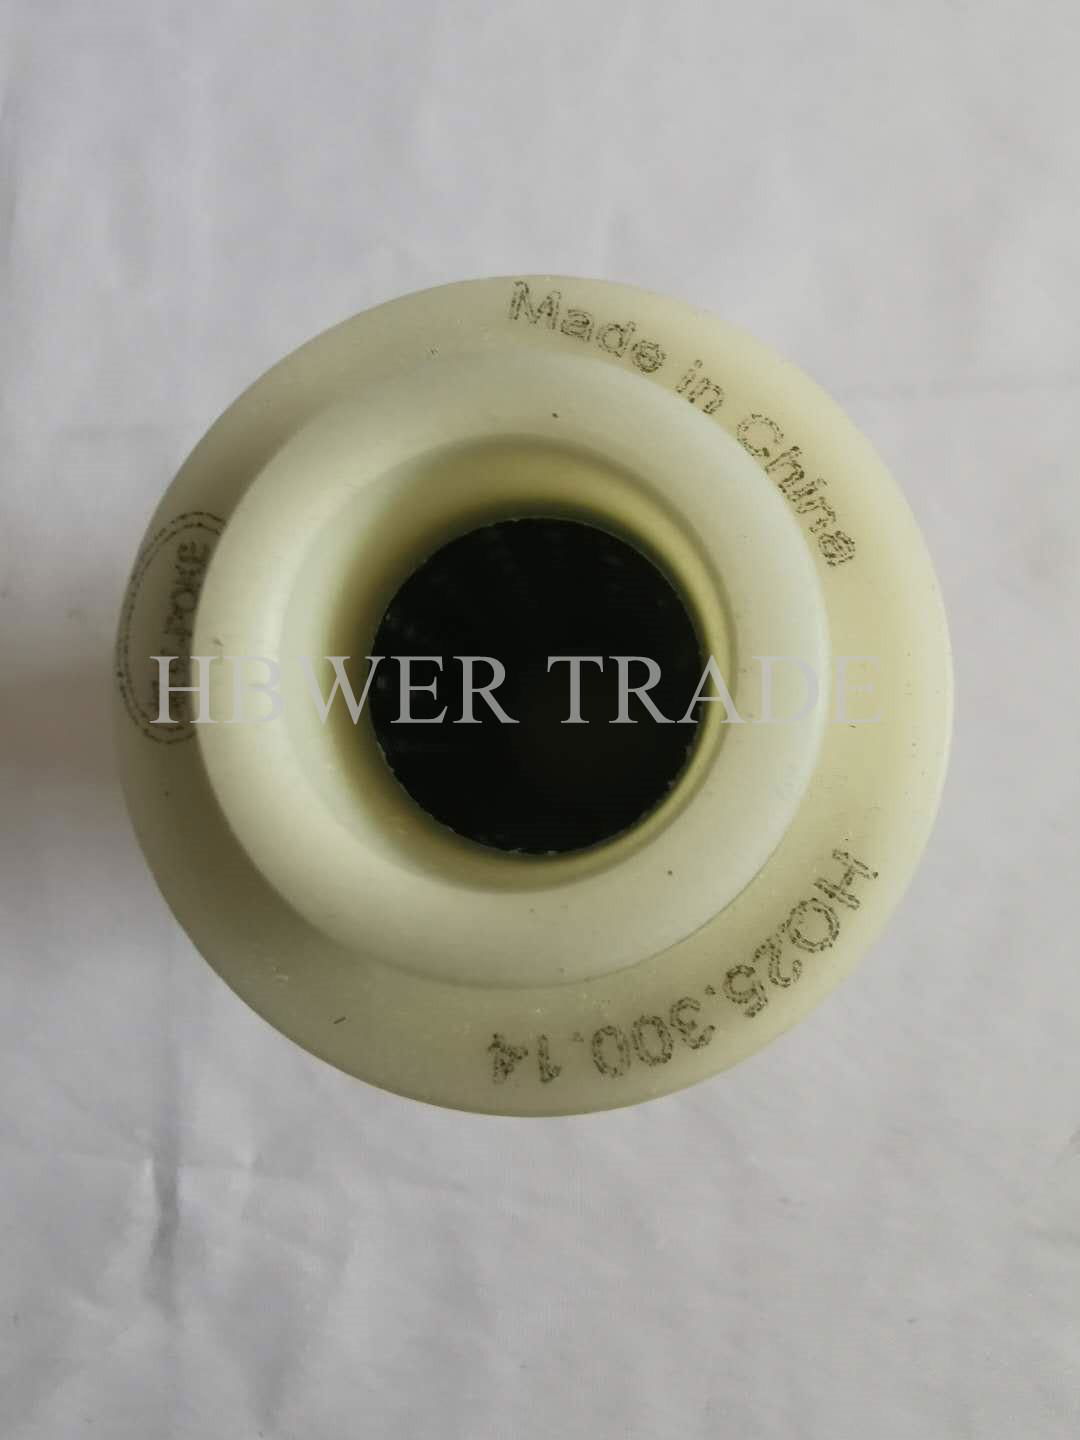 Hydraulic oil filter element HQ25.300.14 power plant anti-fuel system filter ele 5